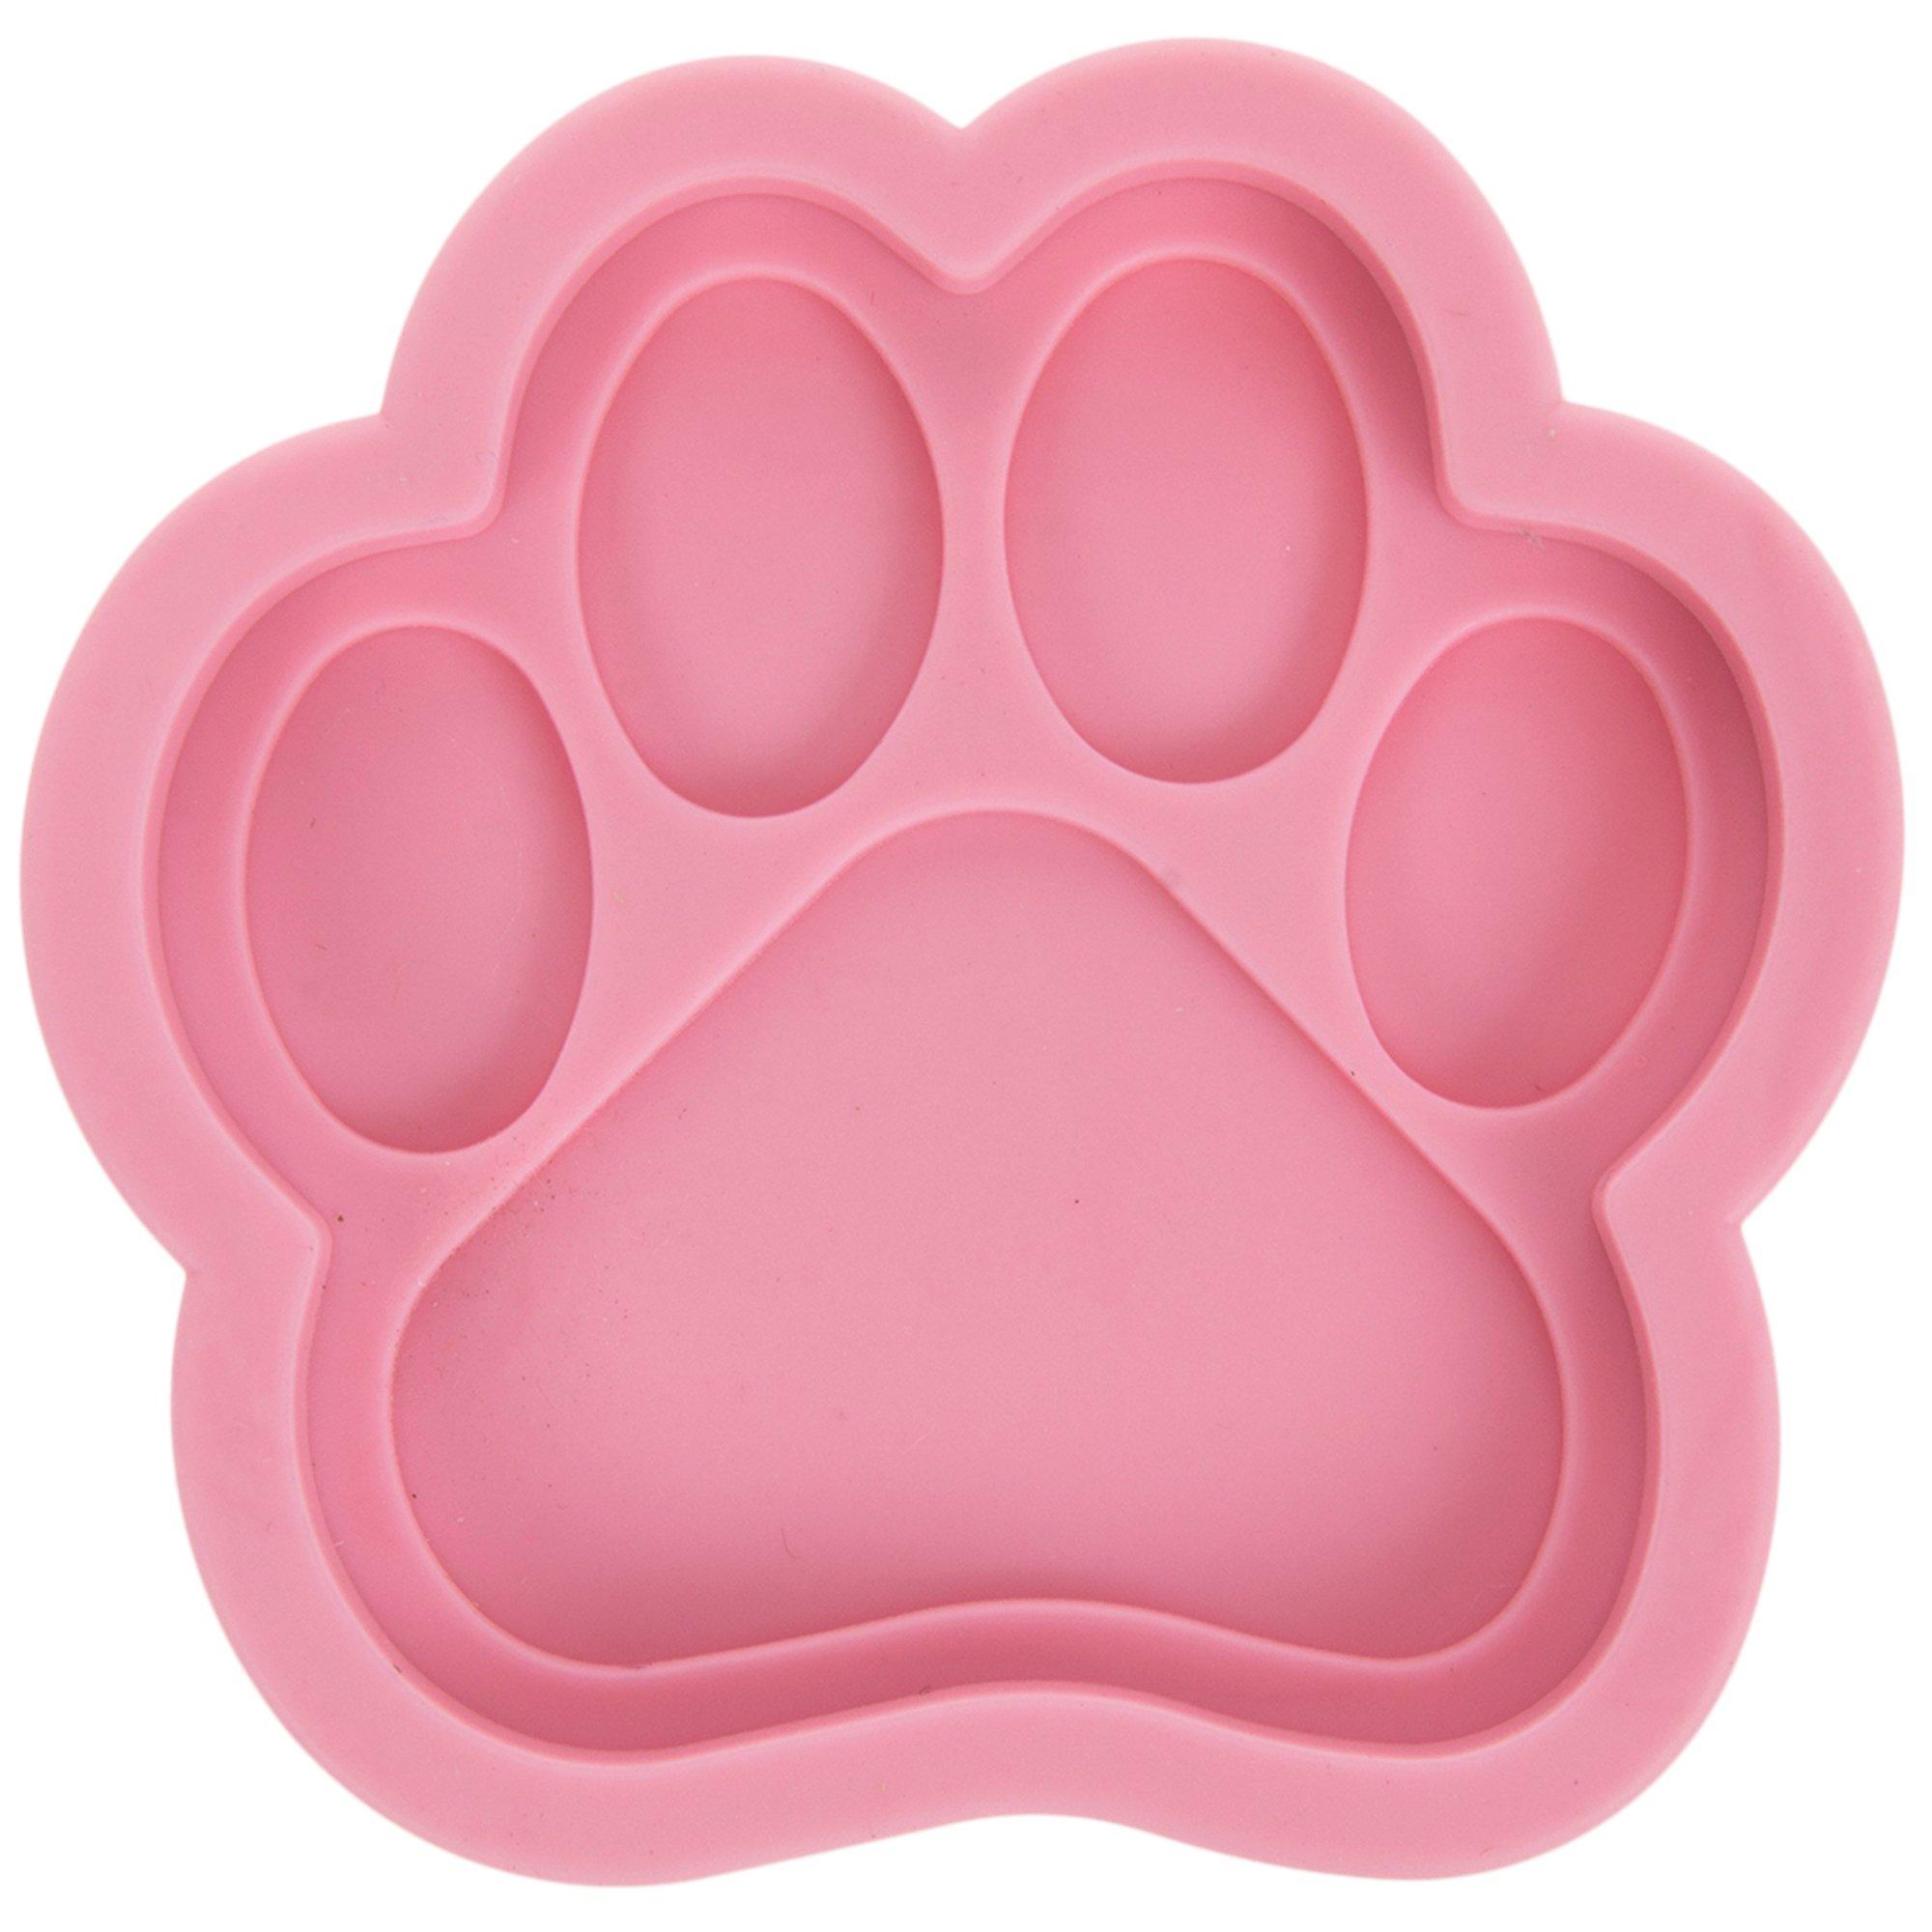 Dog Bone and Paw Print Silicone Mold - Annettes Cake Supplies